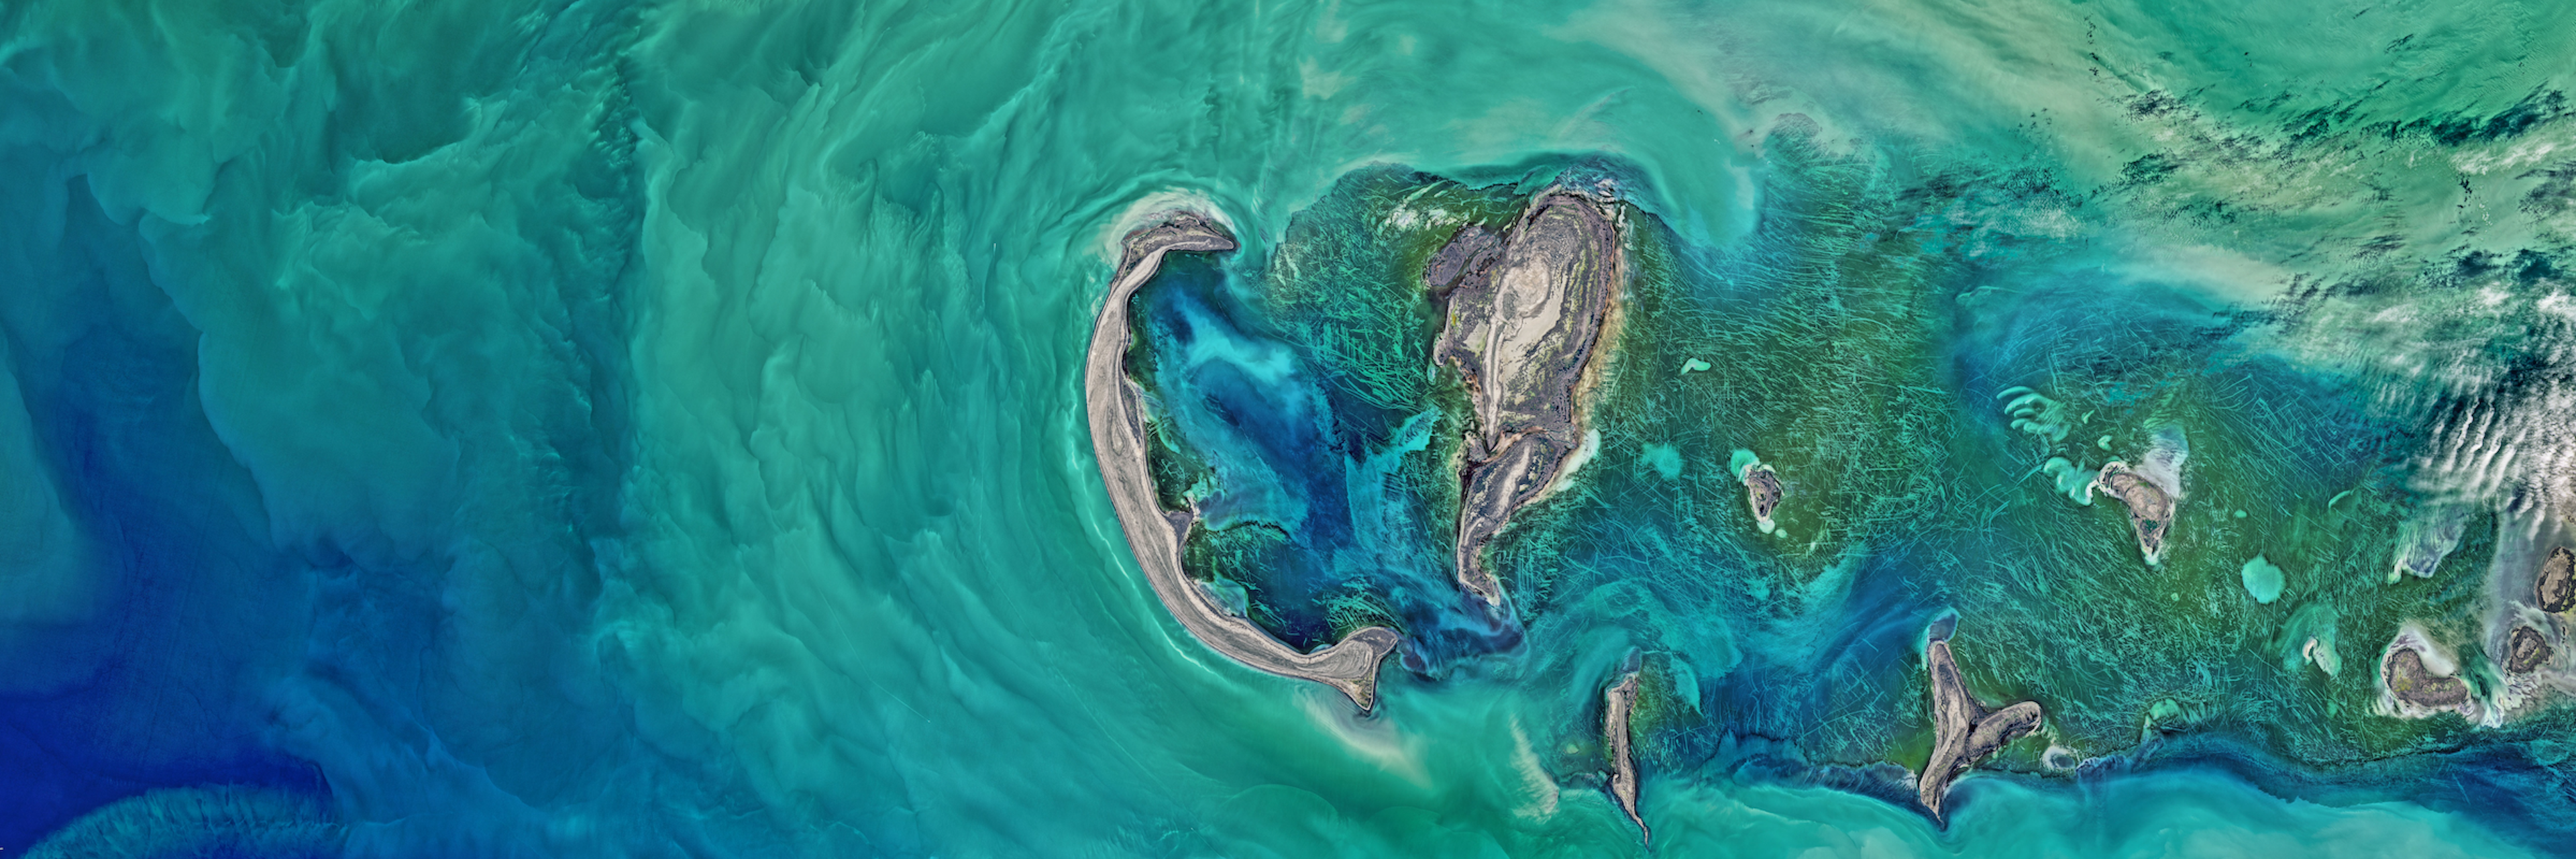 Satellite picture of an island and the ocean